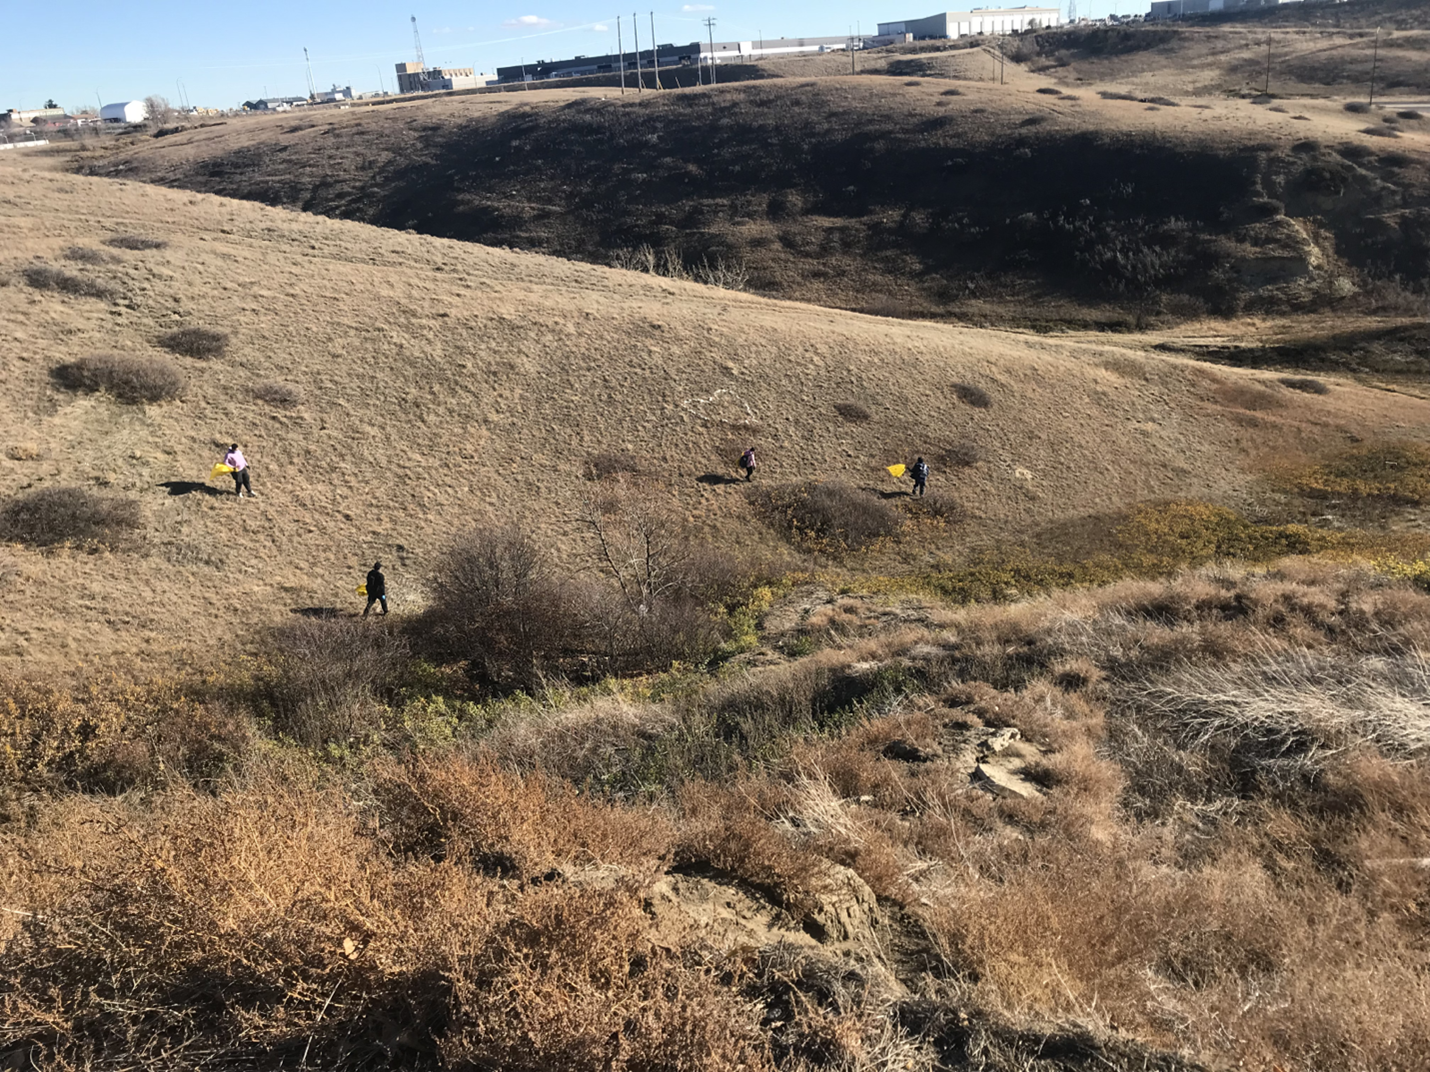 A view of the coulees with litter on the landscape 